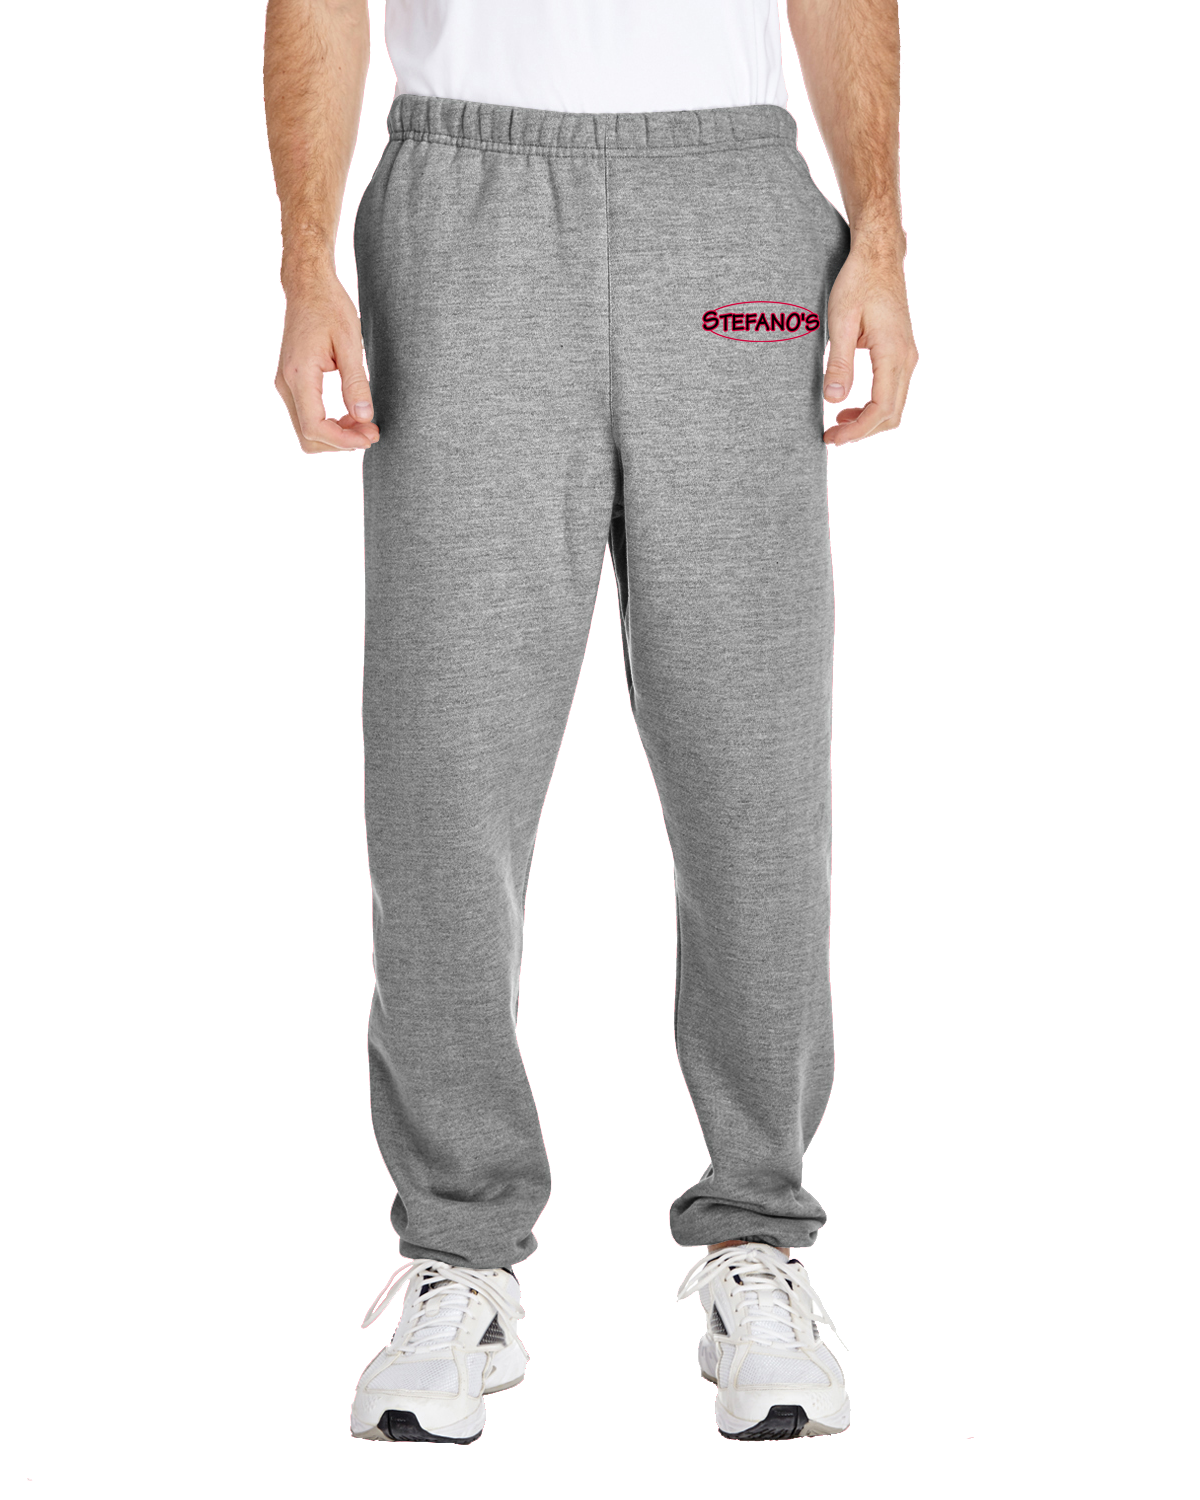 Champion Jogger - Grey - Stefano's Landscaping